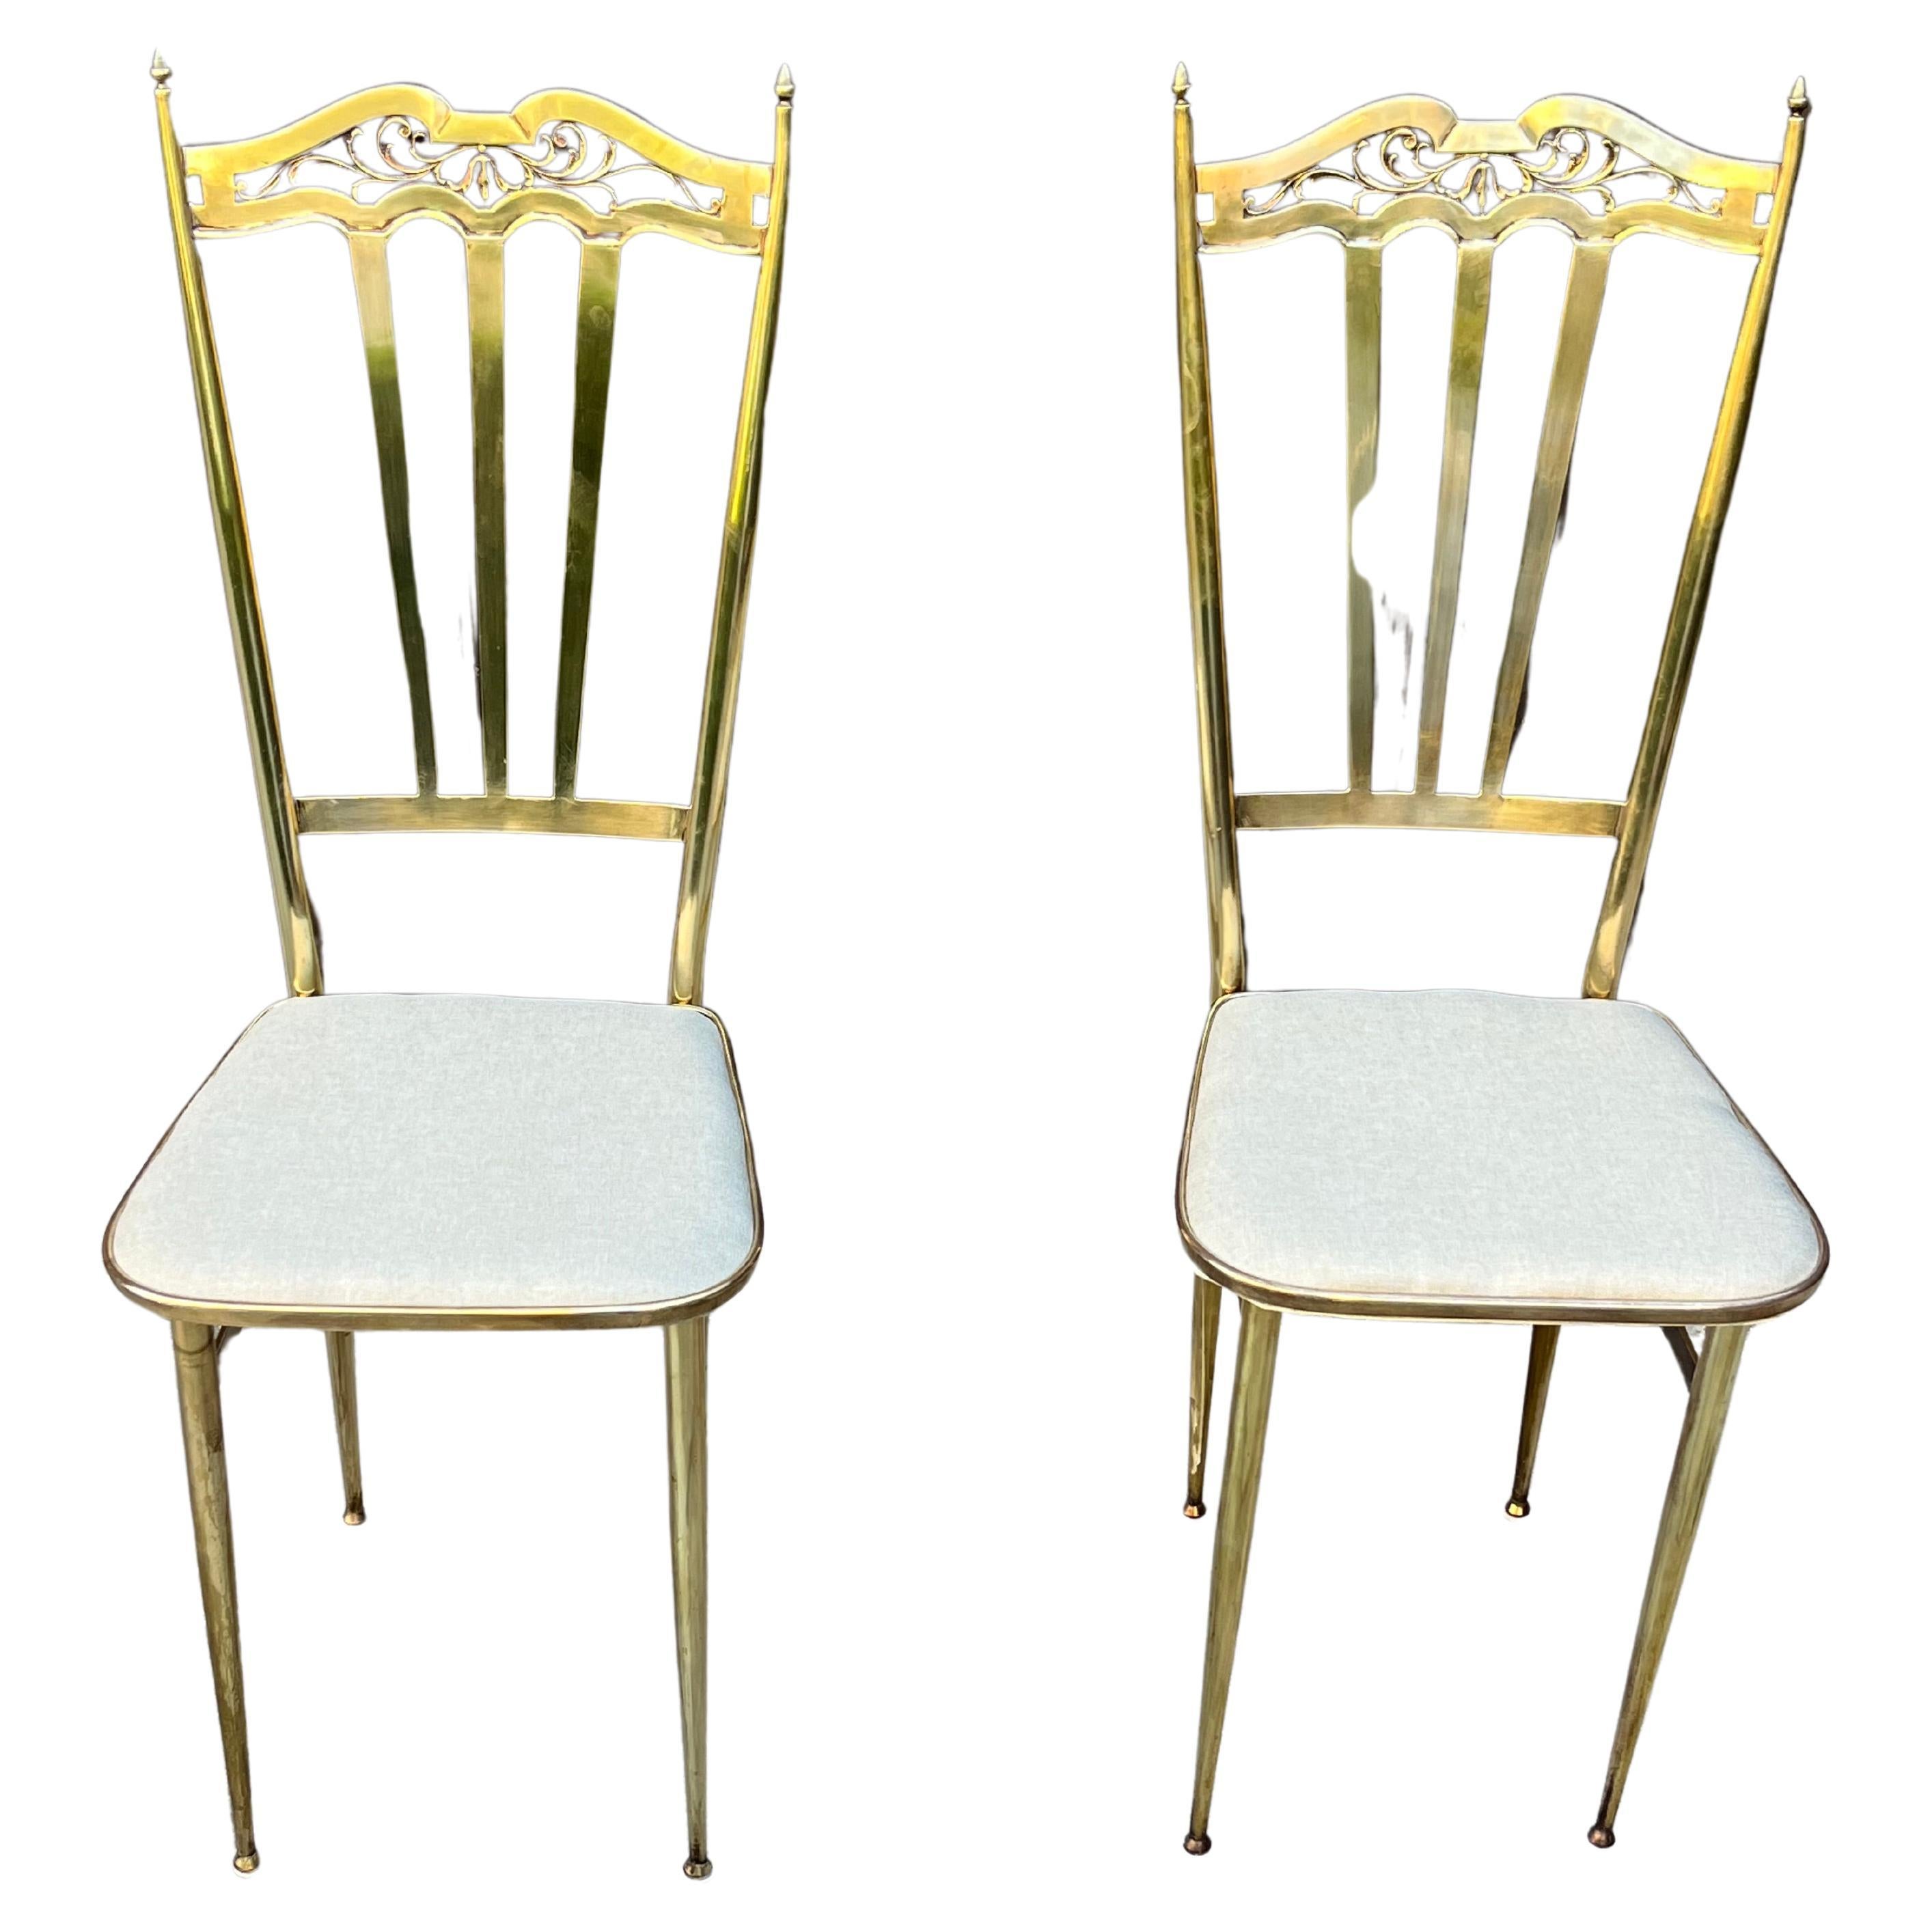 Set of 2 Mid-Century brass chairs, Italian design 1960s
Polished and reupholstered, they are in excellent condition. Found in a noble apartment in my city.

We guarantee adequate packaging and will ship via DHL, insuring the contents against any